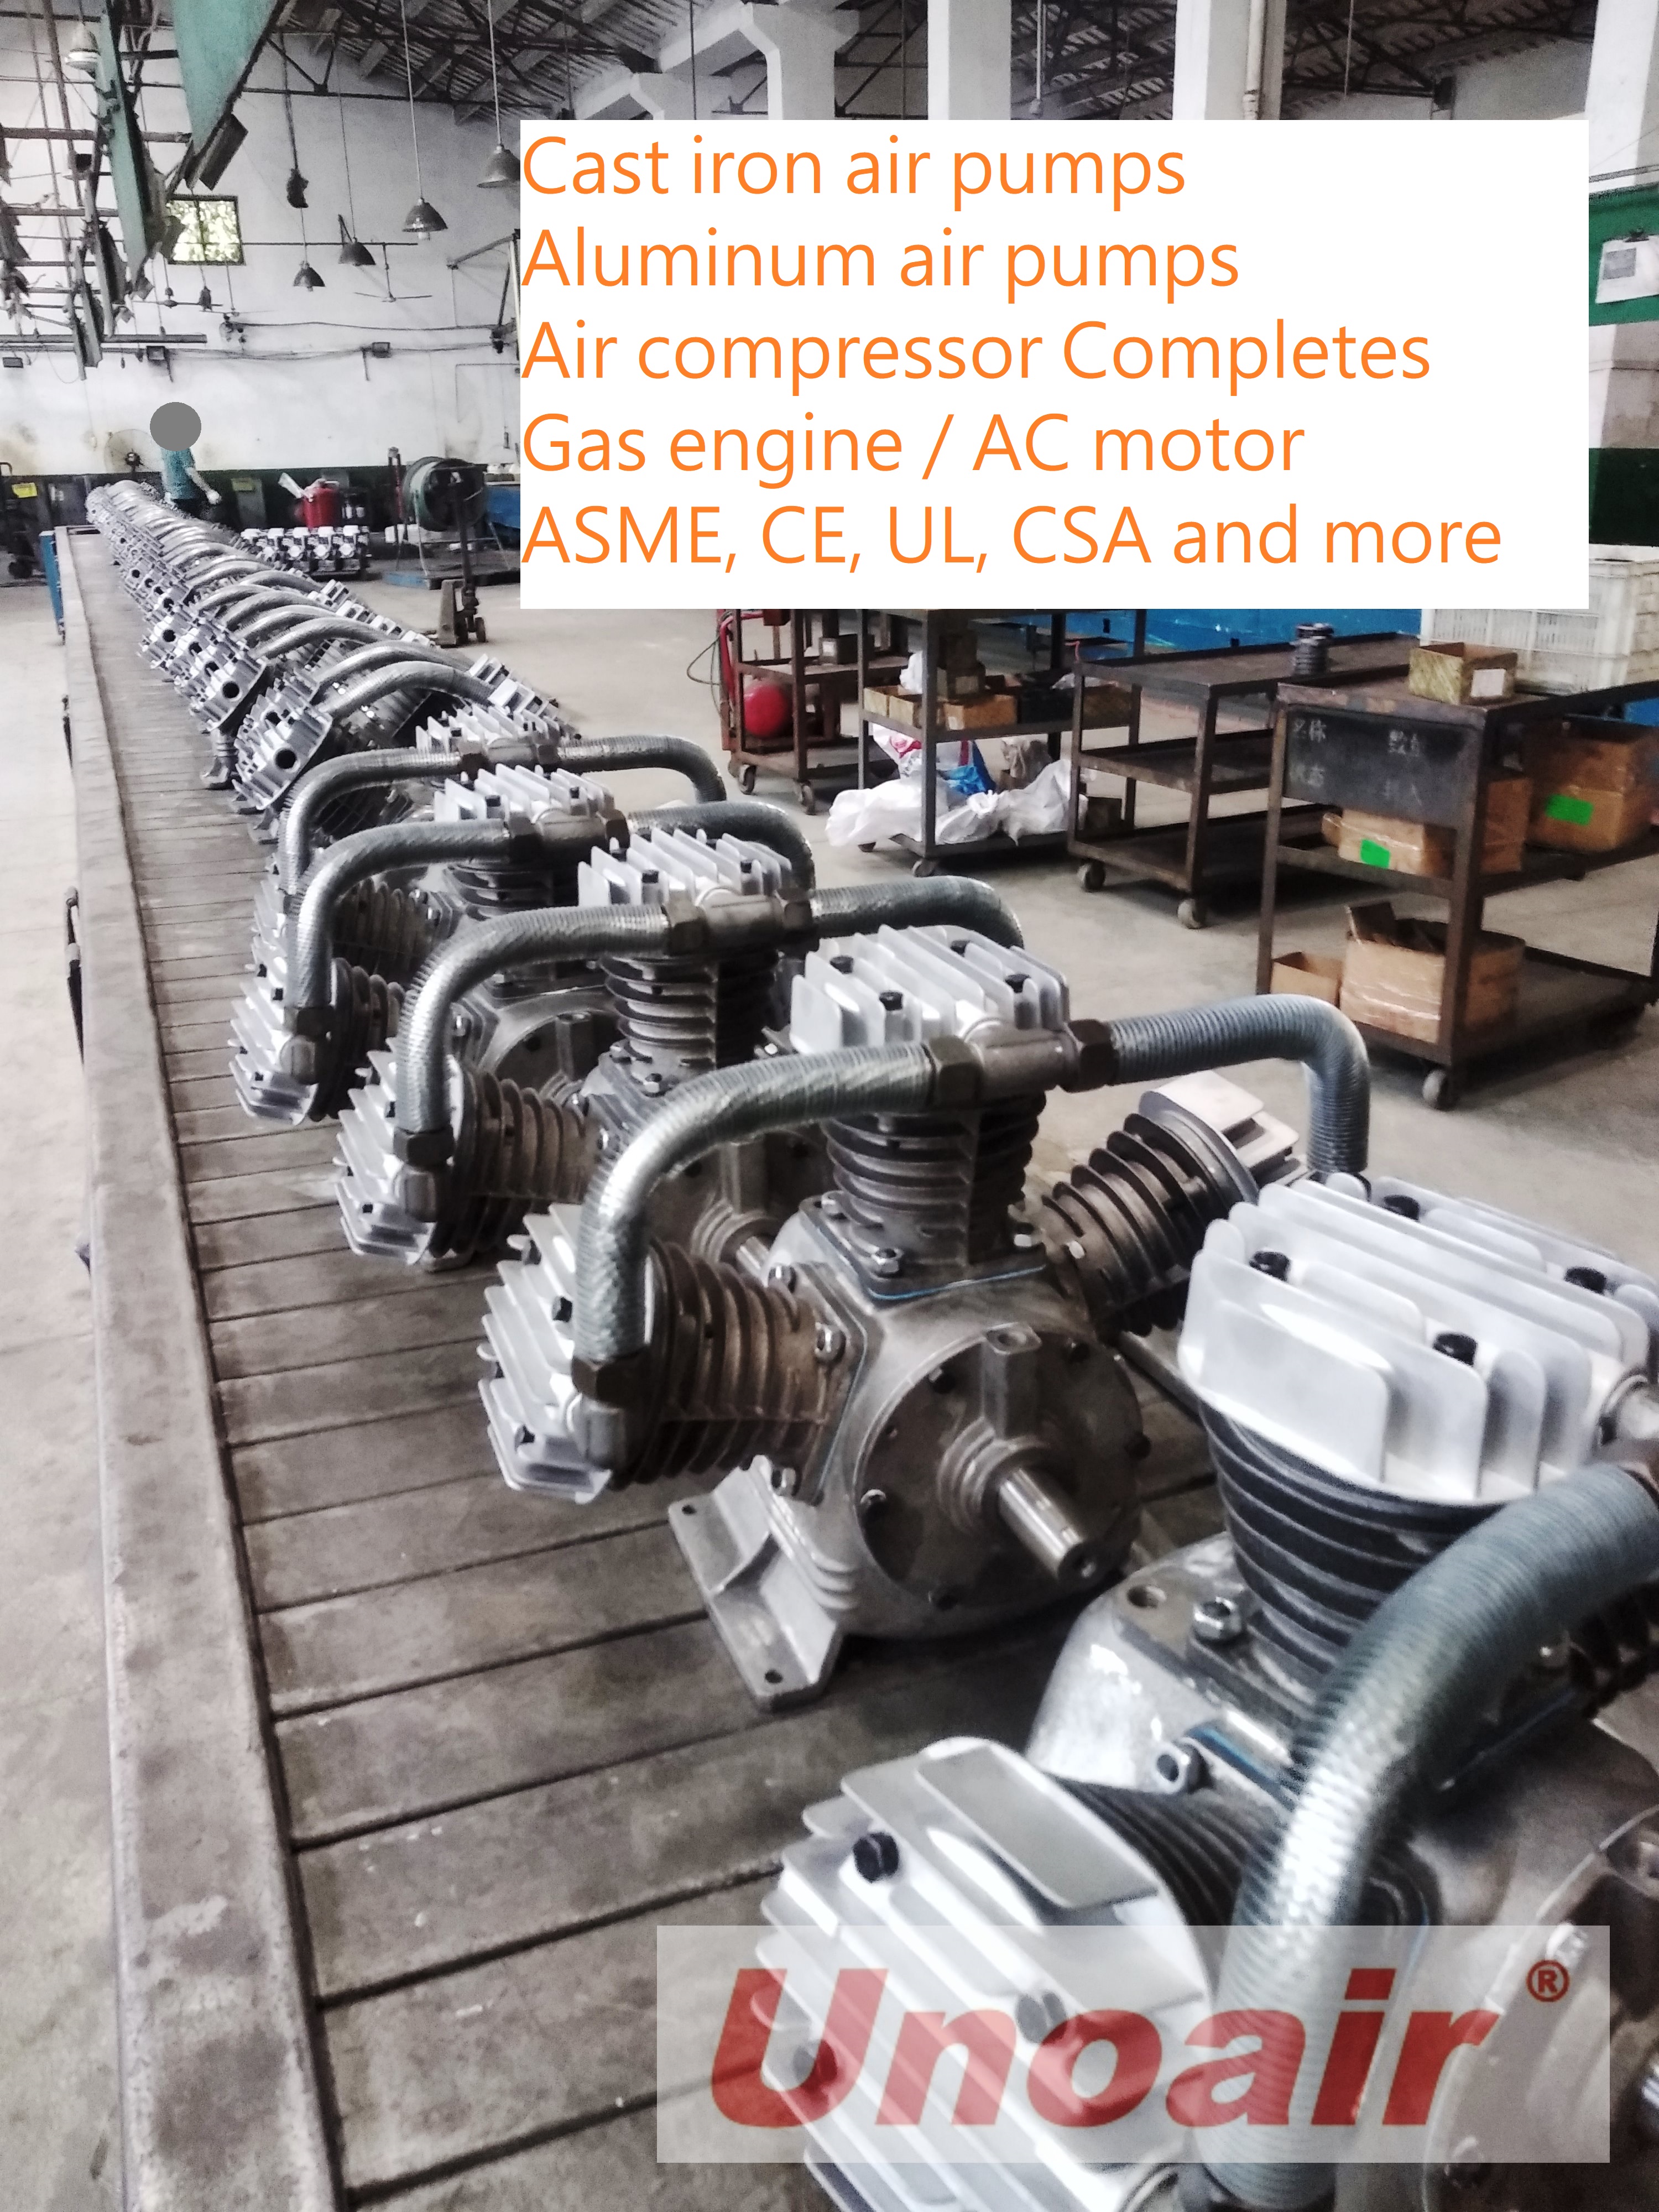 UNOAIR Weekly Update 07/01/2022 Gas engine powered compressors and AC motor compressors